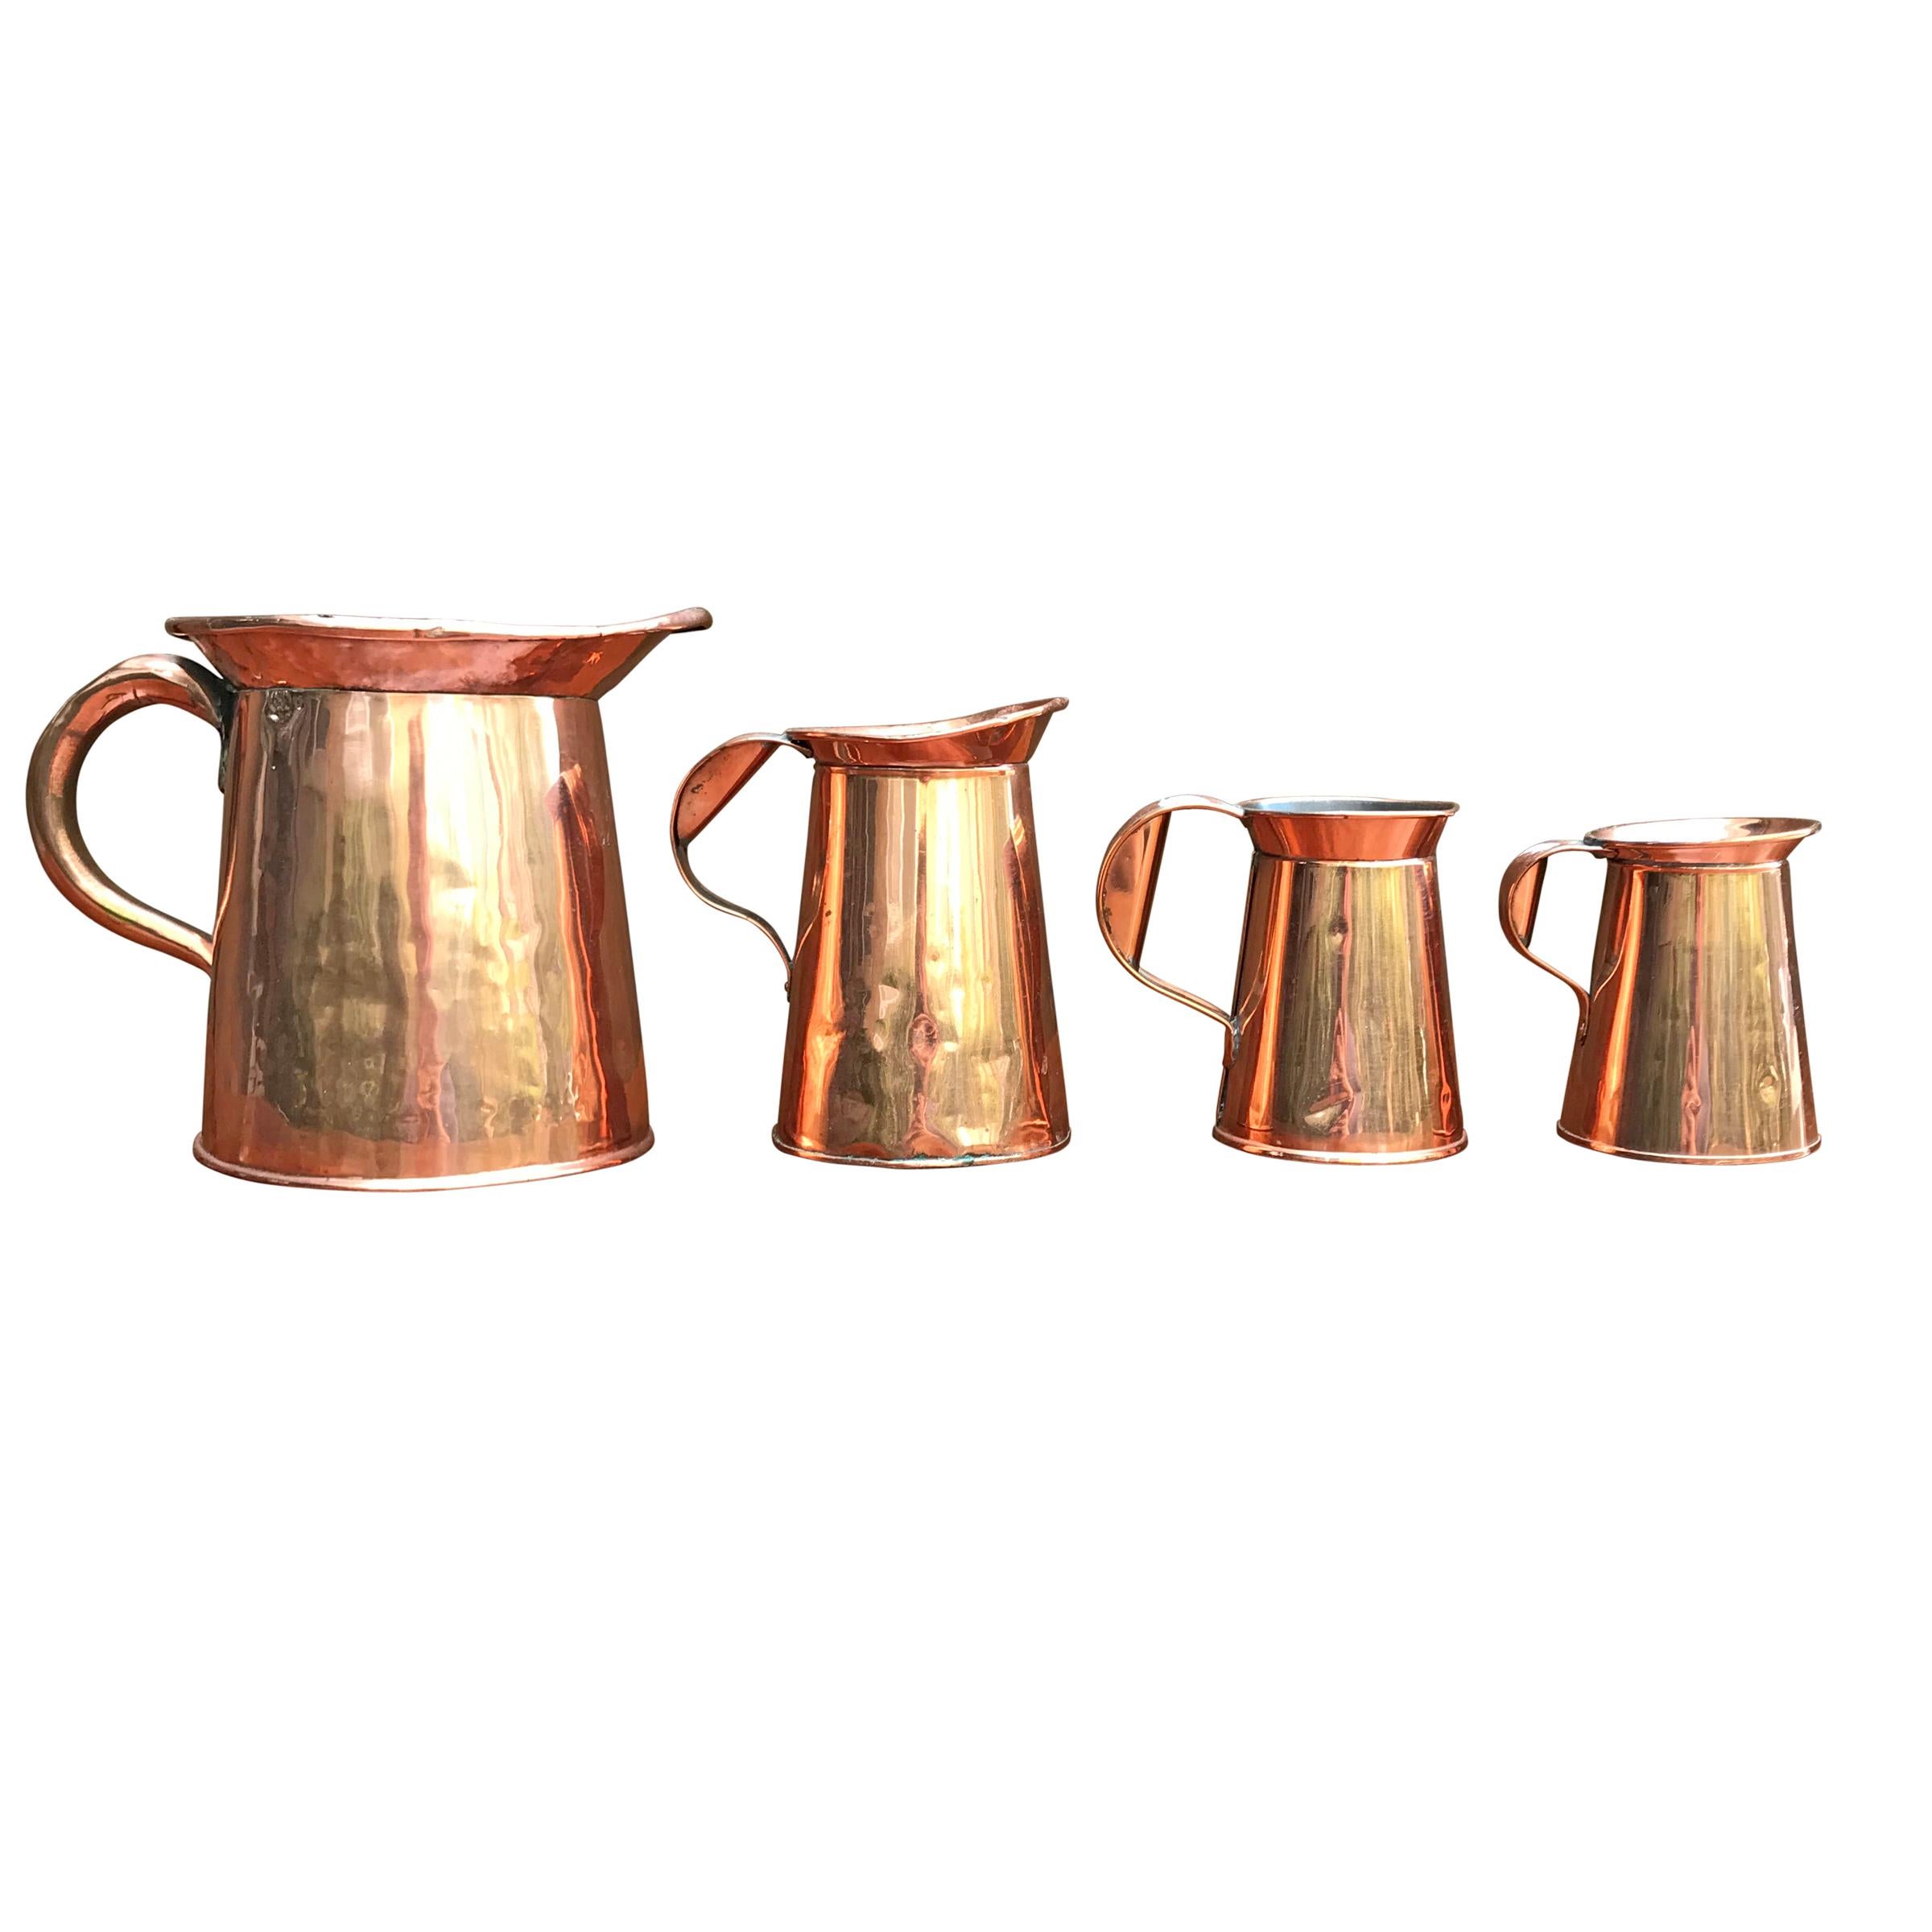 Set of Four English Victorian Period Copper Pitchers